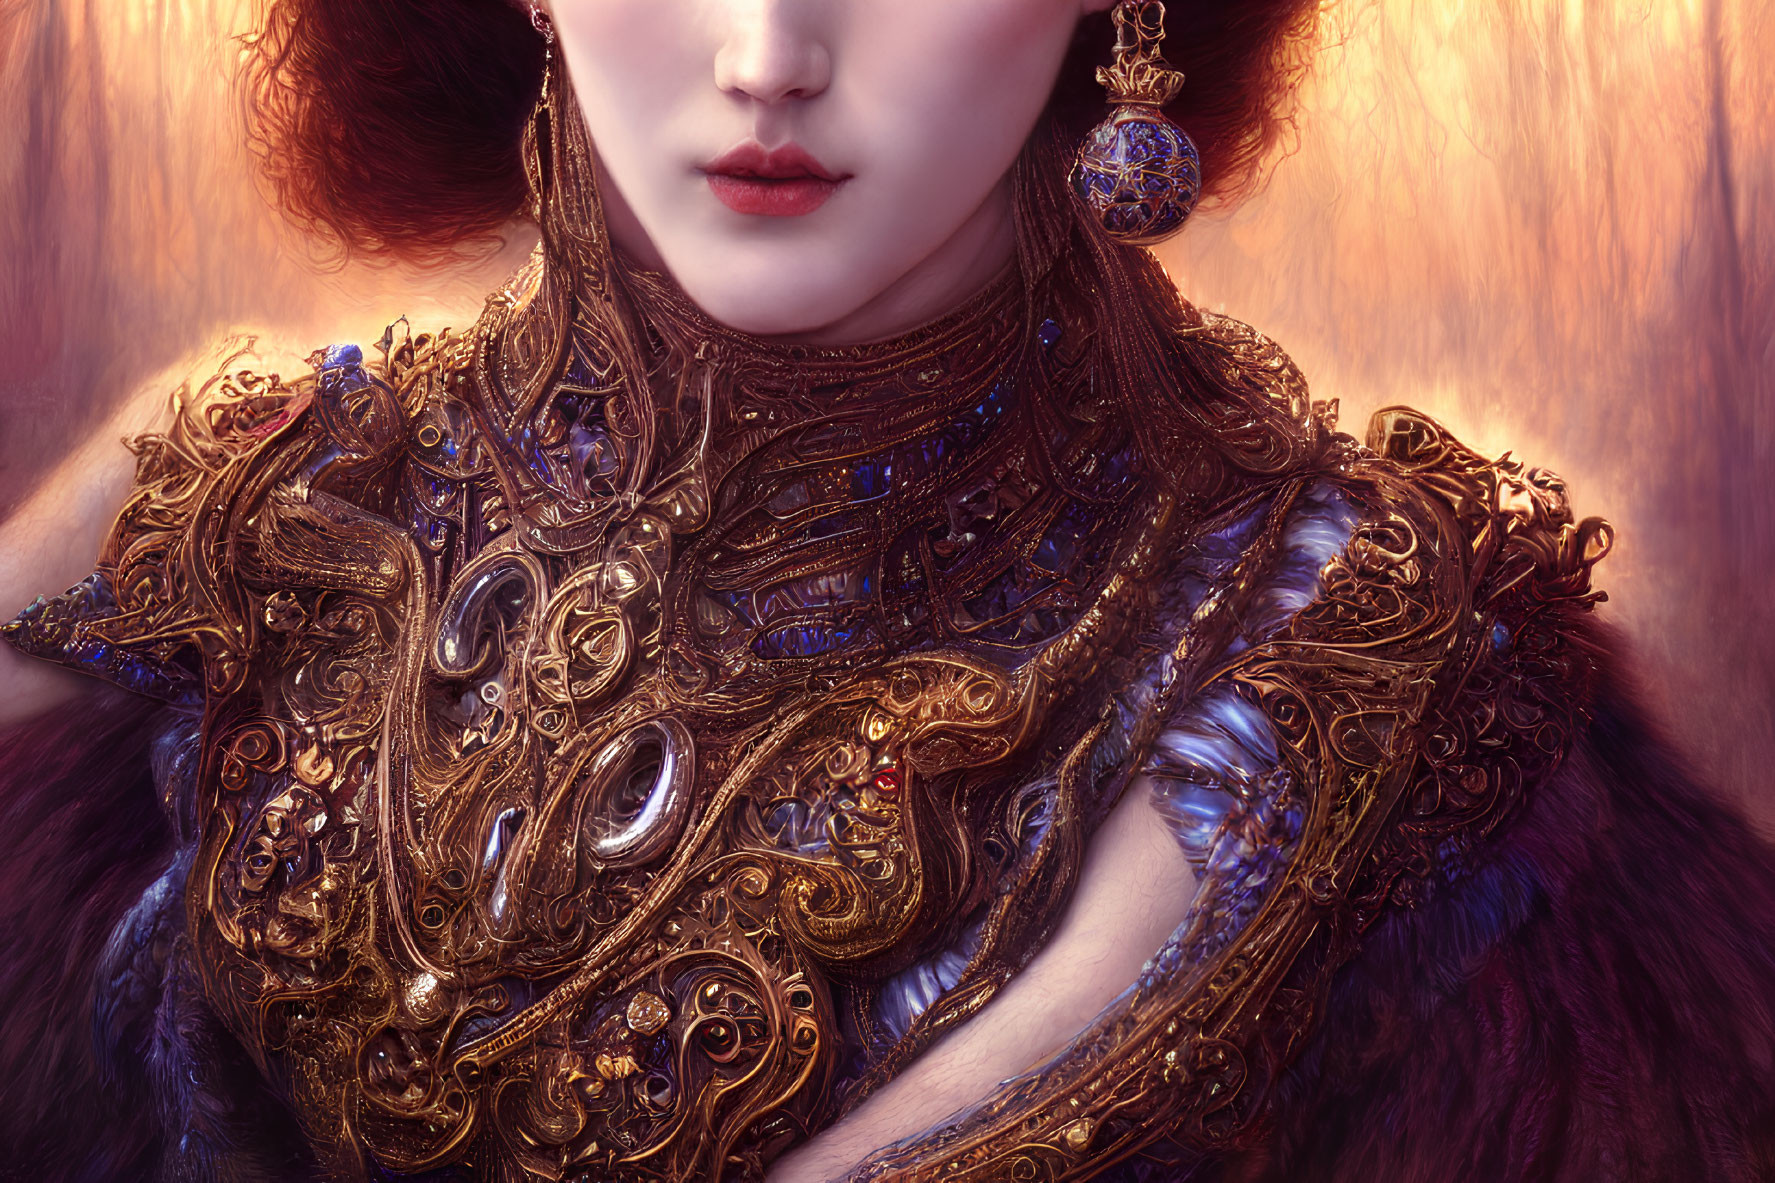 Pale-skinned woman in red lipstick wearing gold armor and fur accents on reddish background